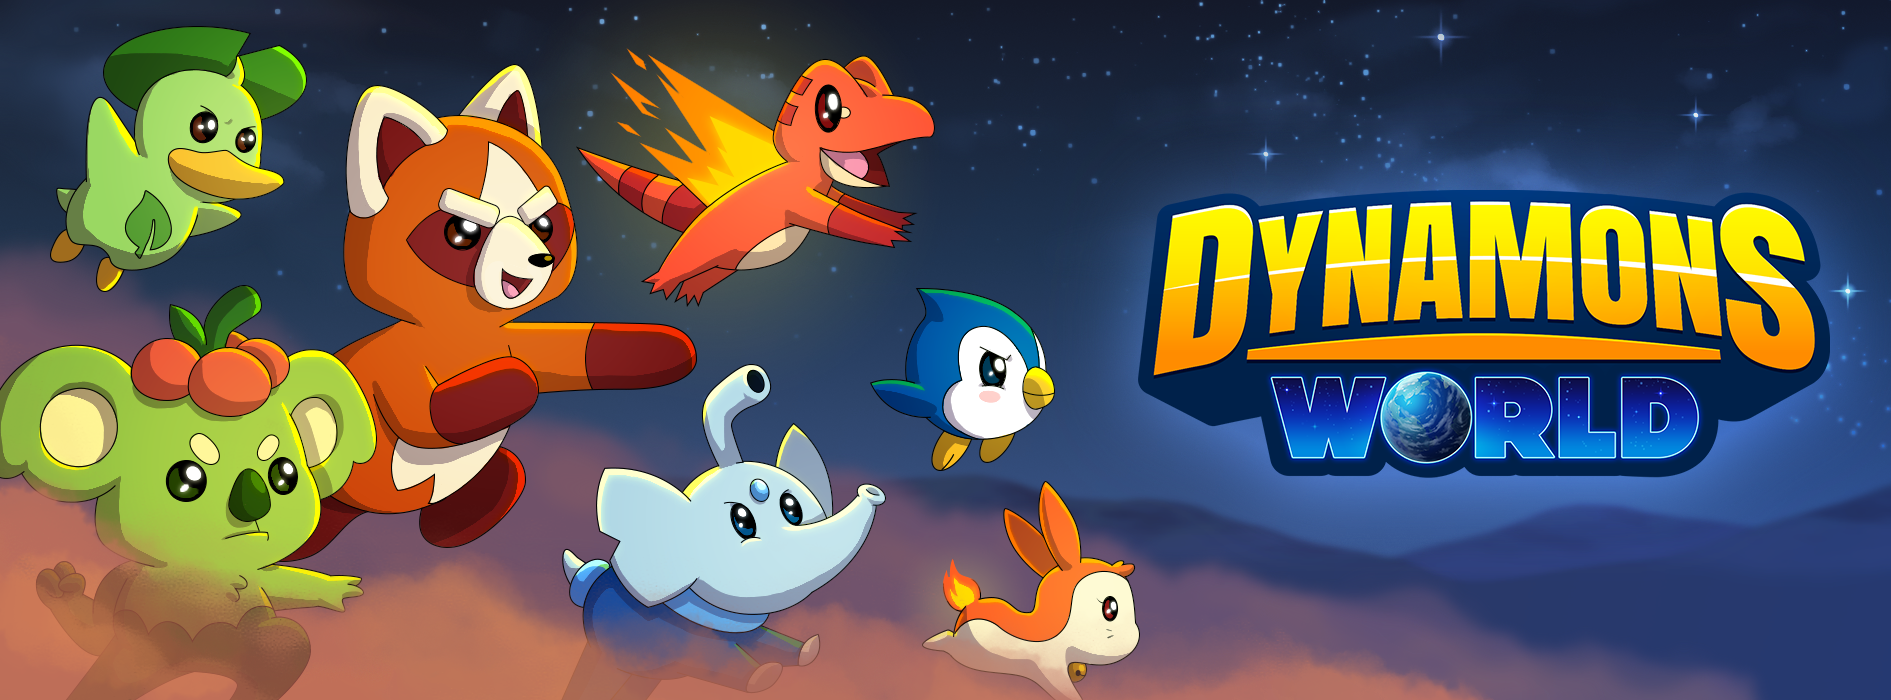 Large feature image showing seven creatures leaping into battle, on the right is a logo that reads "Dynamons World". The letter O in "world" is replaced with planet Earth.